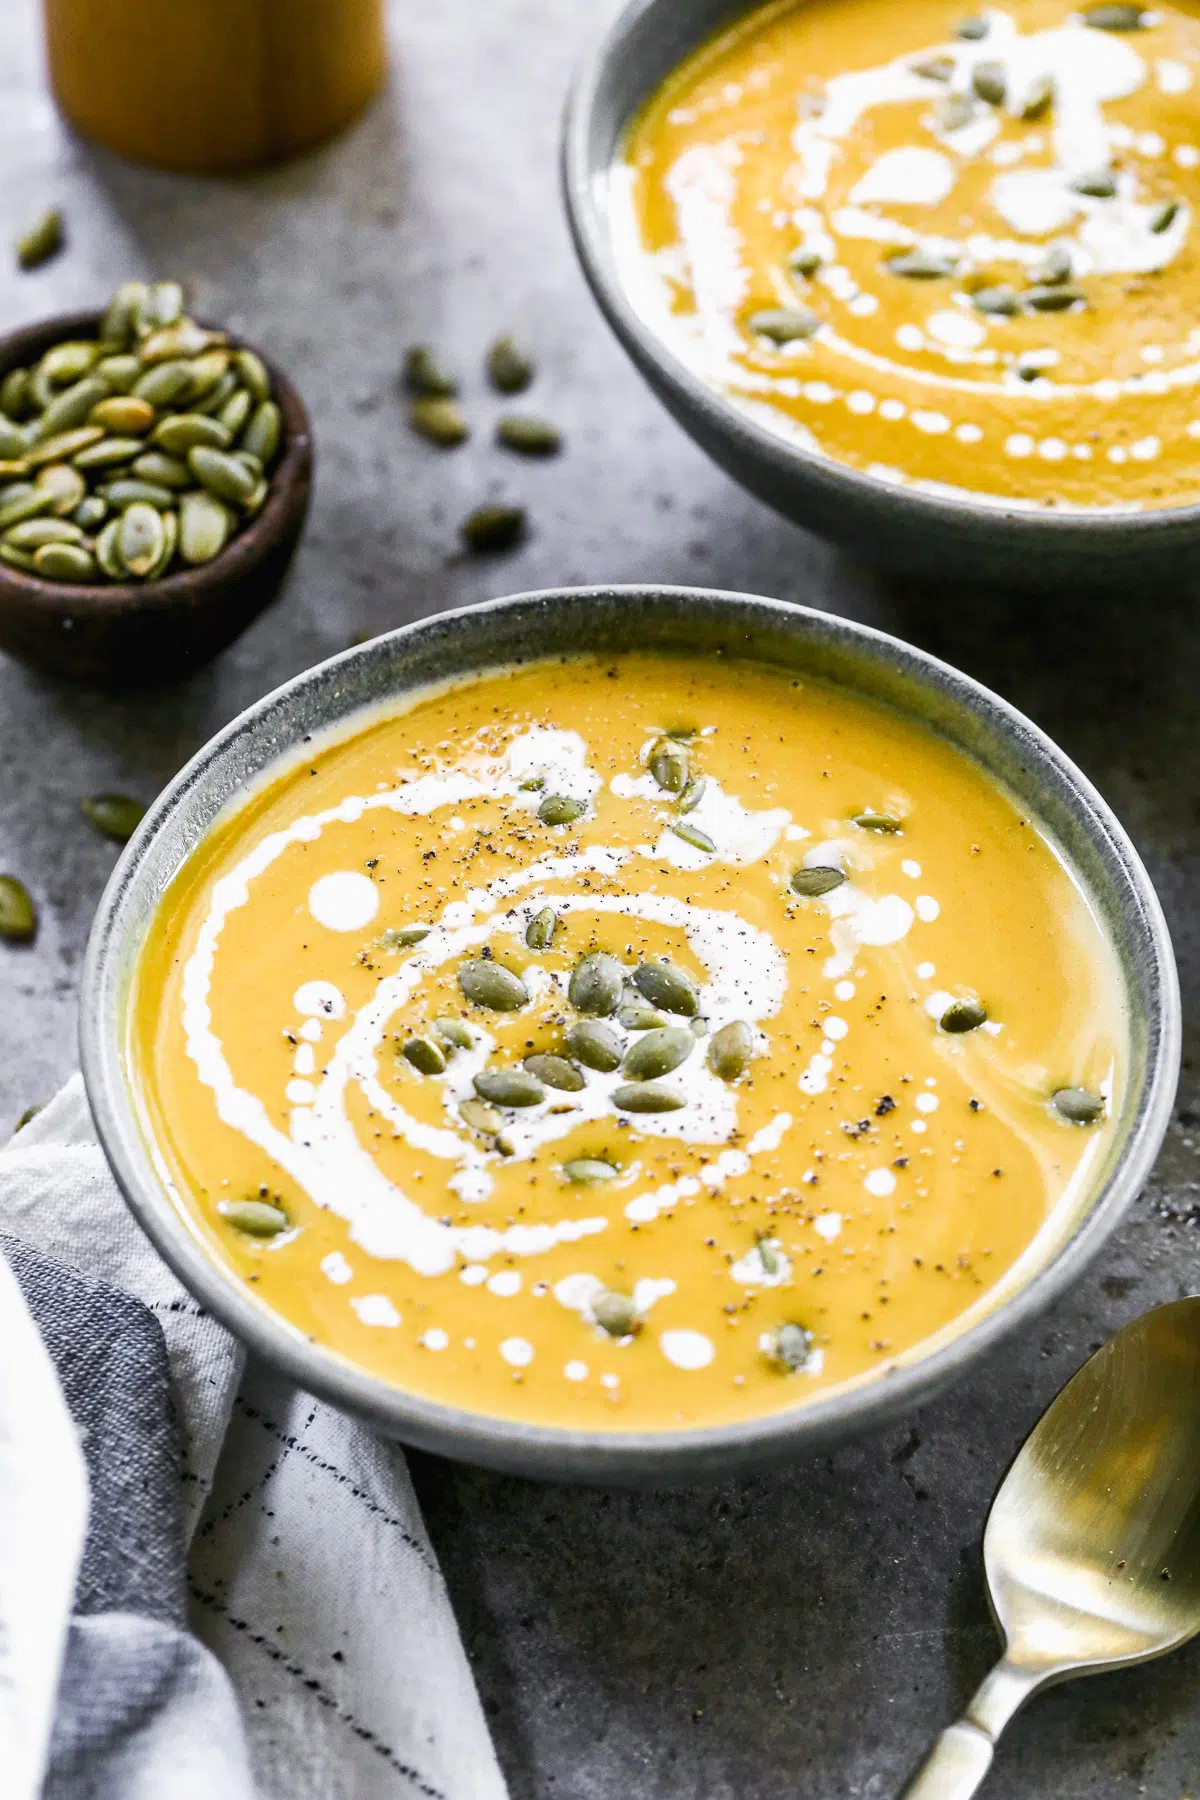 Real pumpkin, carrot, roasted garlic and hints of cardamom and ginger are the makings of our inagural ode to fall - Roasted Pumpkin Soup. This seasonal soup is creamy, luxurious and the only thing making the transition from hot sunny days to cooler temps bearable. 